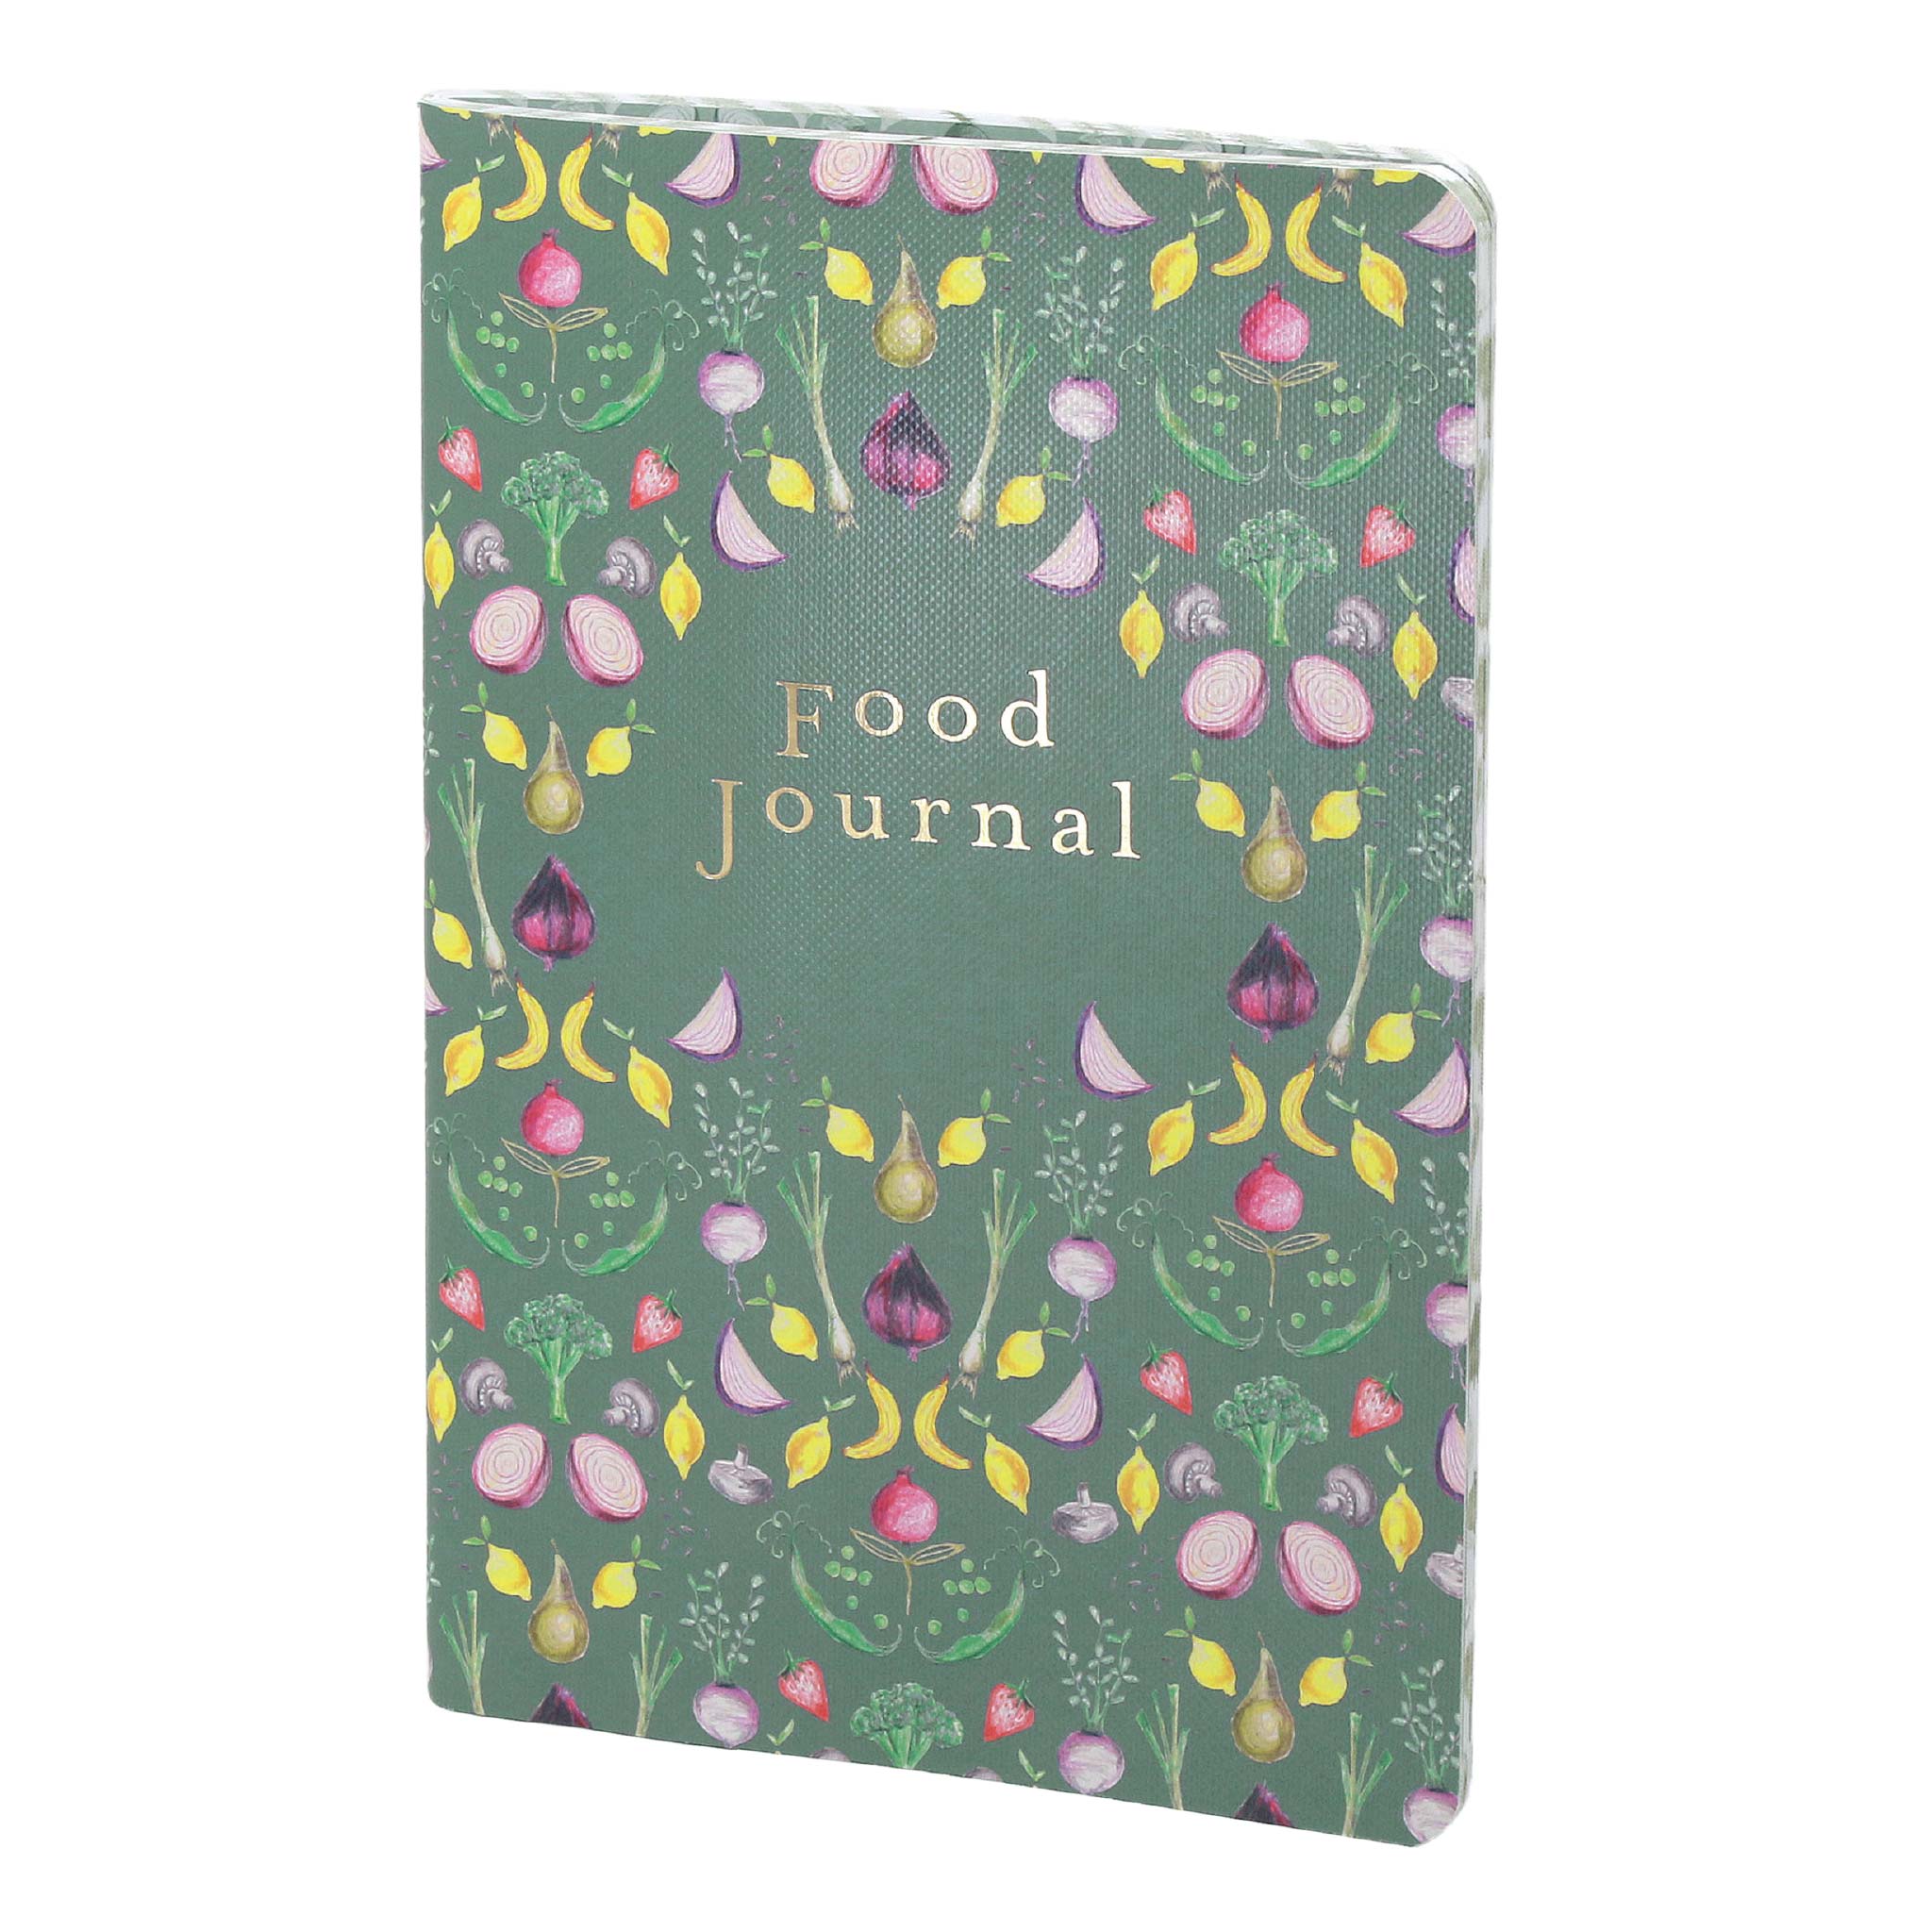 An image of Food Journal | Food Diary with Diet Pages, Weight Loss Trackers & More Vegetable...